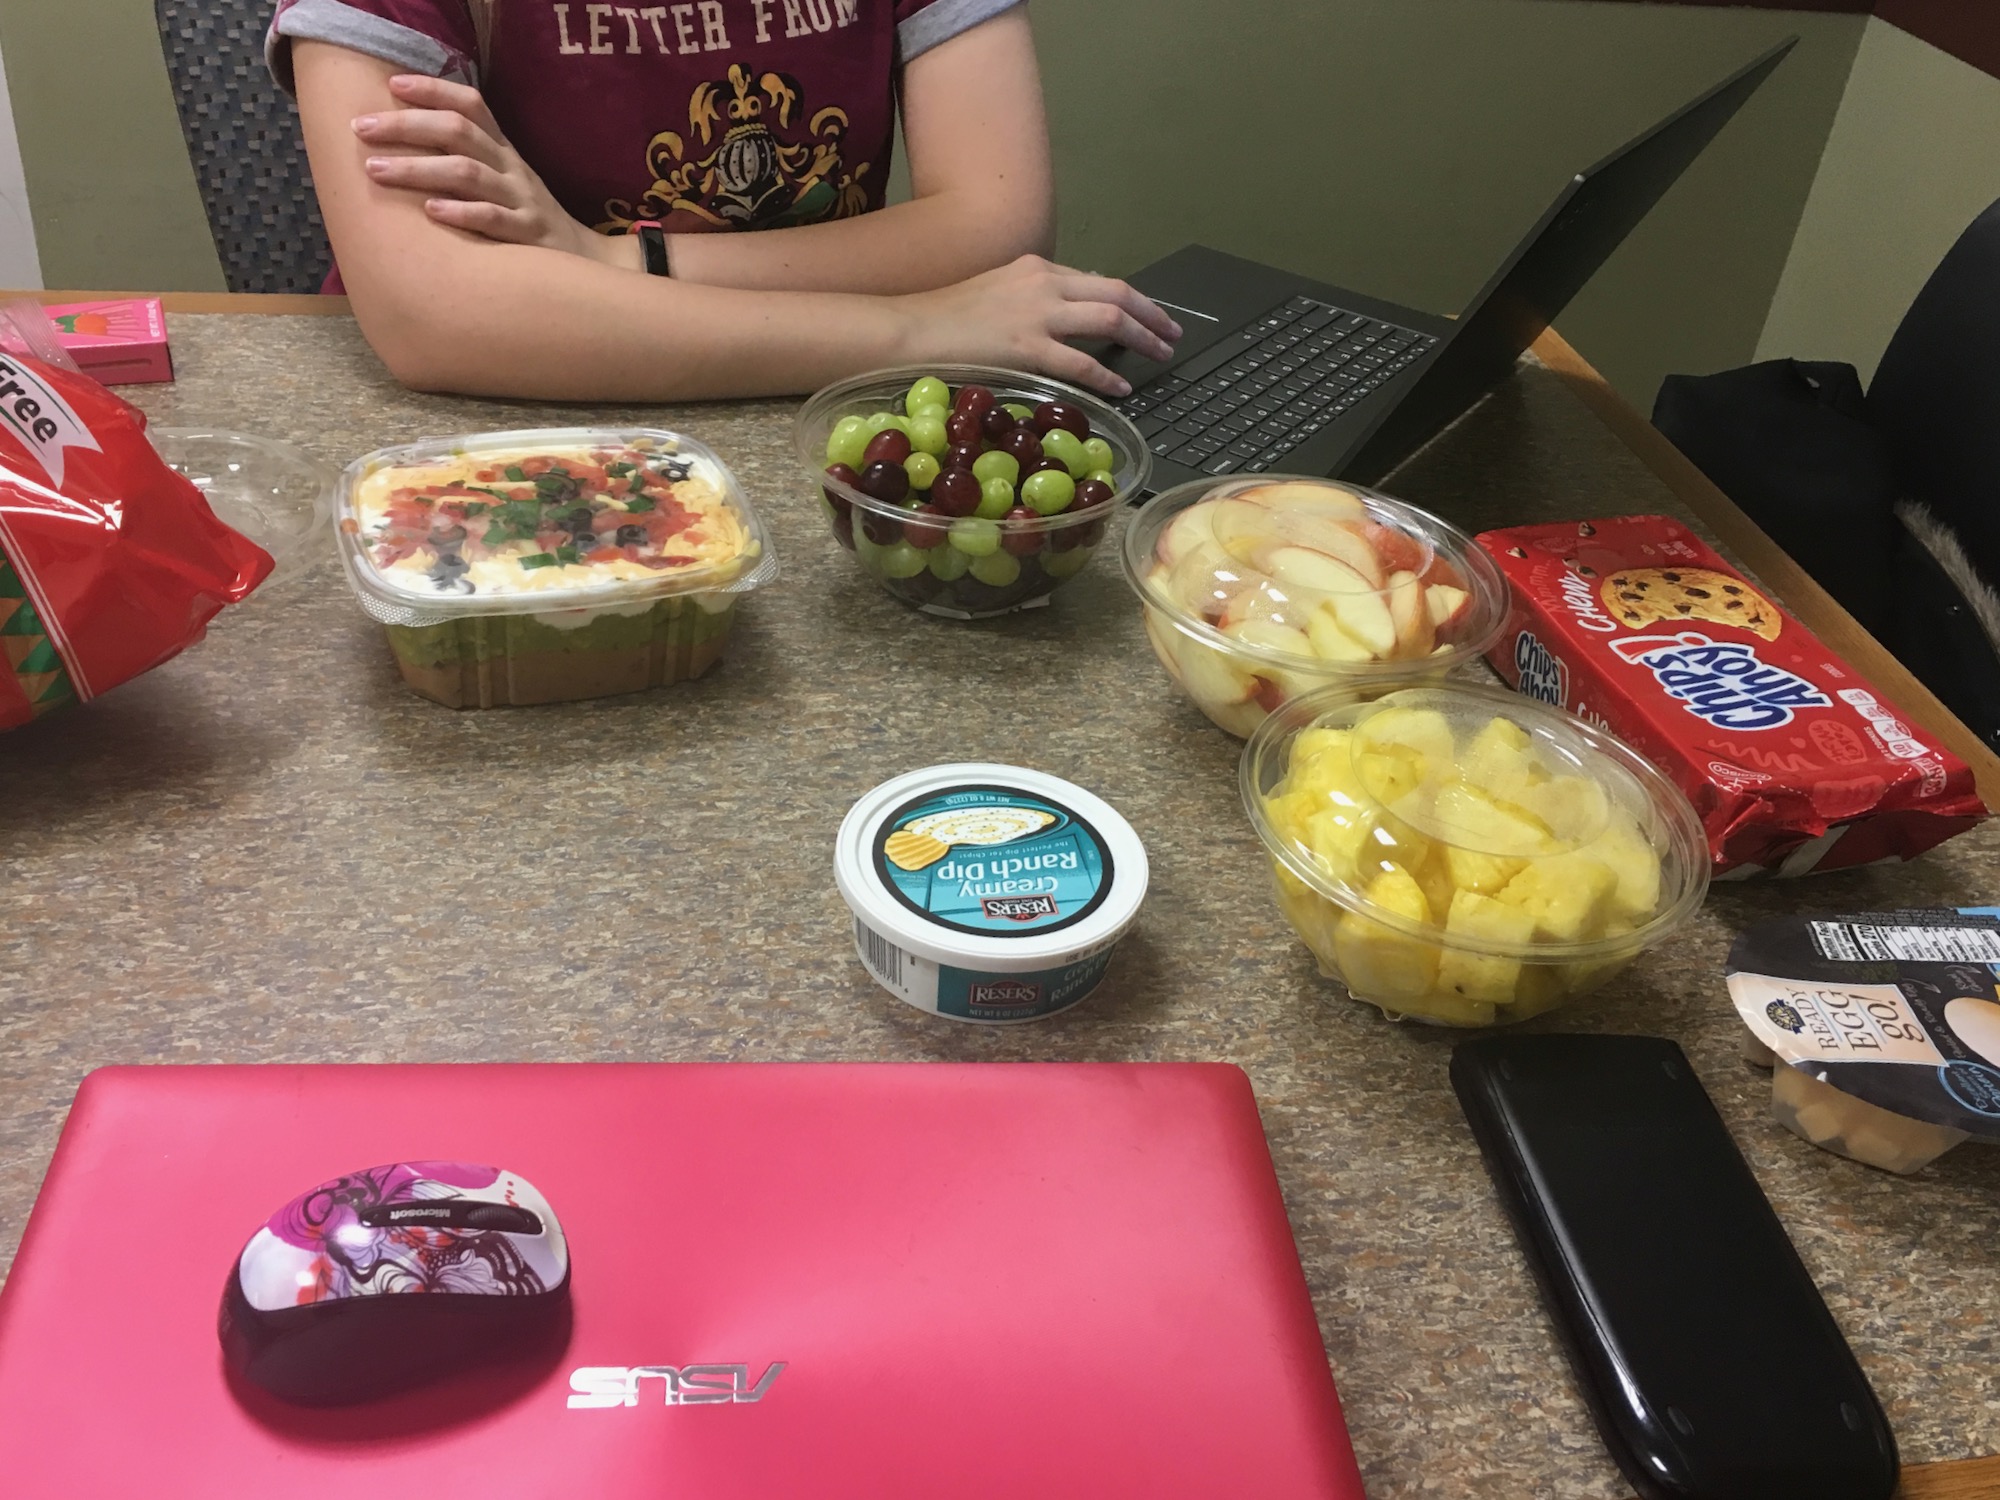 There is a person working on a laptop, there are several snacks on the table around the laptop.